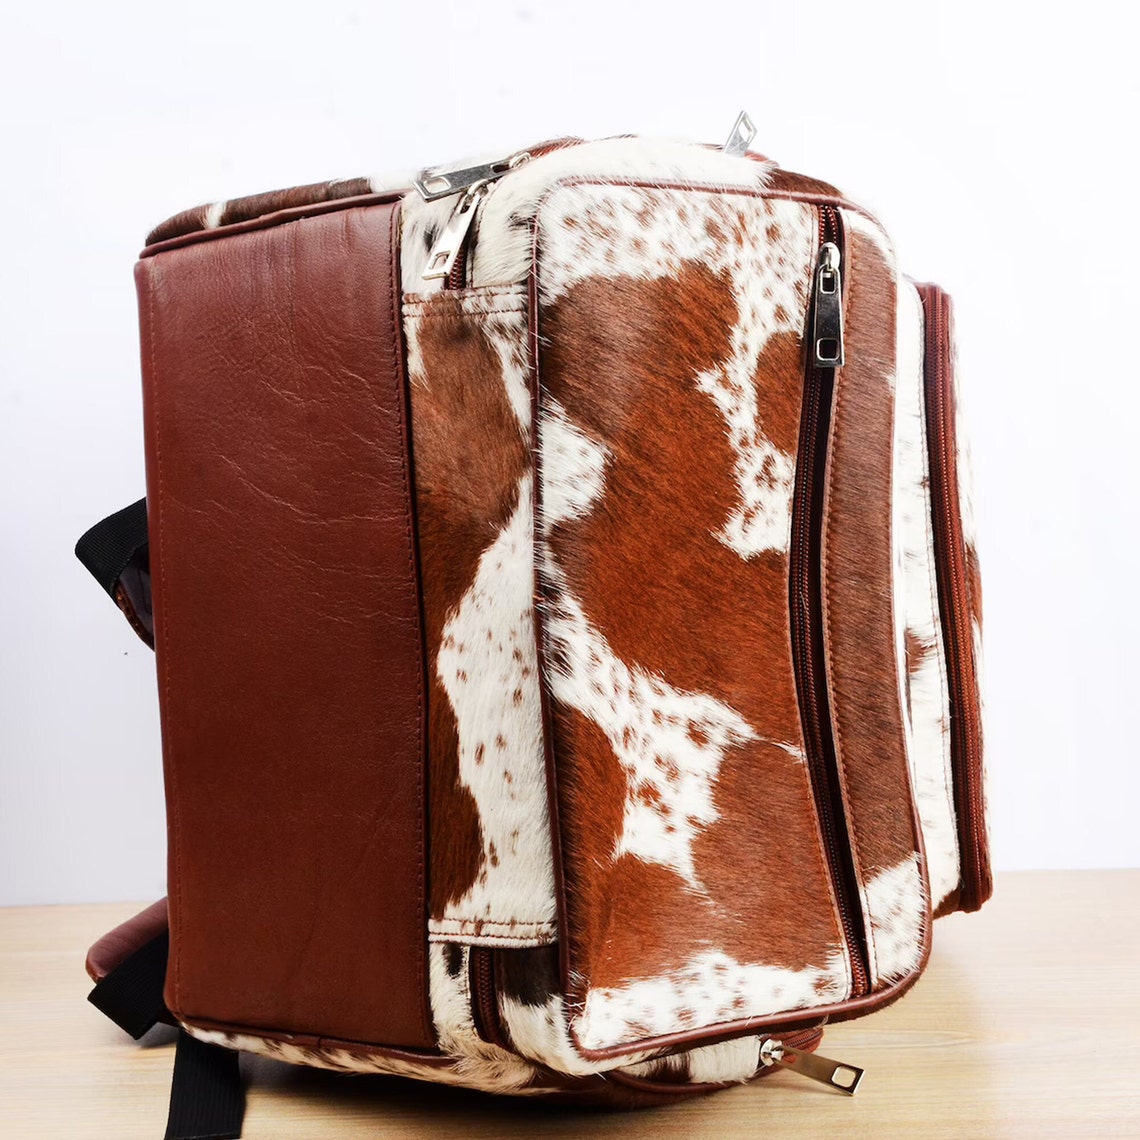 backpack cowhide backpack personalize backpack leather backpack laptop backpack travel backpack travel guide hand luggage backpackerseather backpack mother's day sale mother's day gift customize backpack personalized leather backpack cowhide bag leather laptop bag laptop backpack travel backpack travel bags unisex bag diaper bag school bag college backpack gift for her gift for him